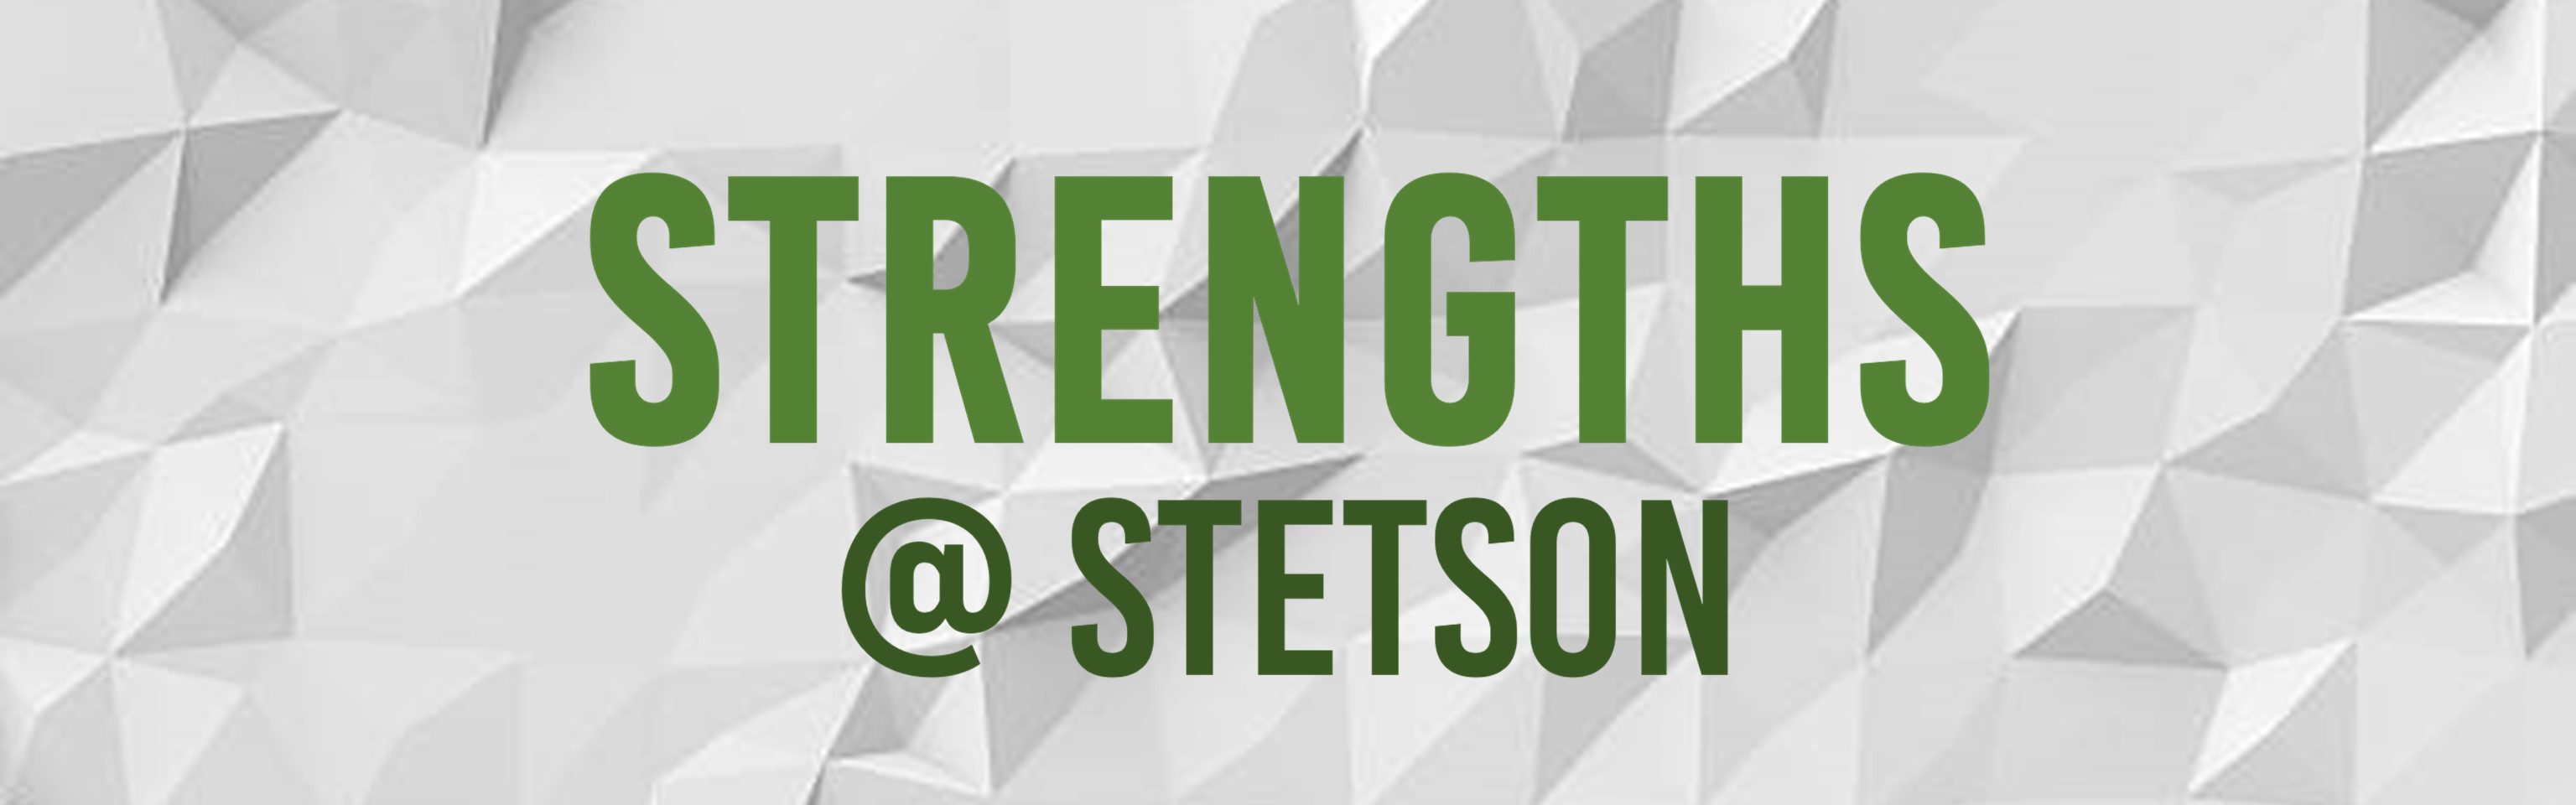 Strengths at Stetson image